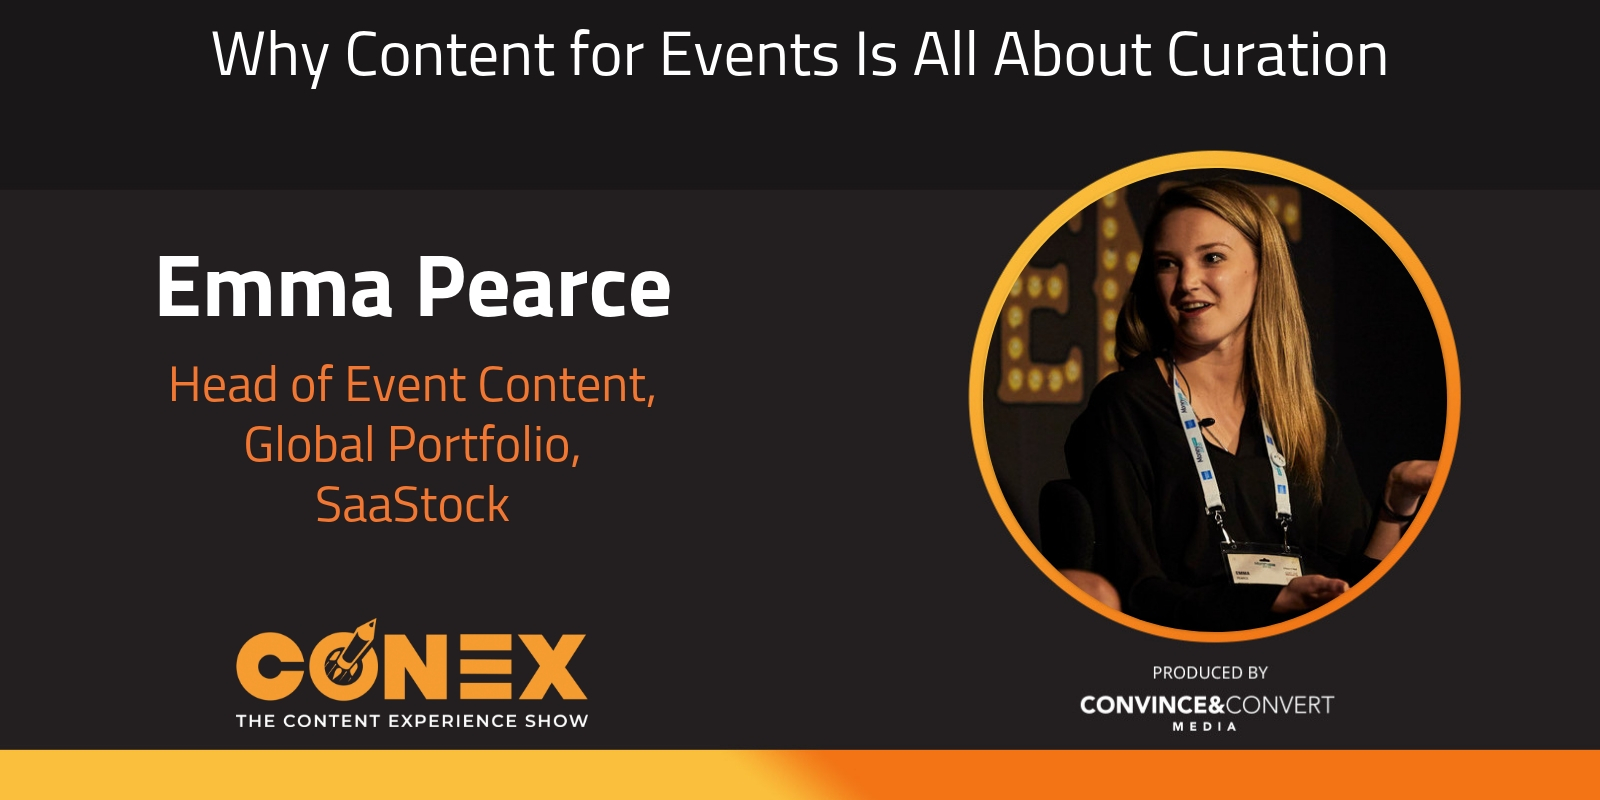 Why Content for Events Is All About Curation